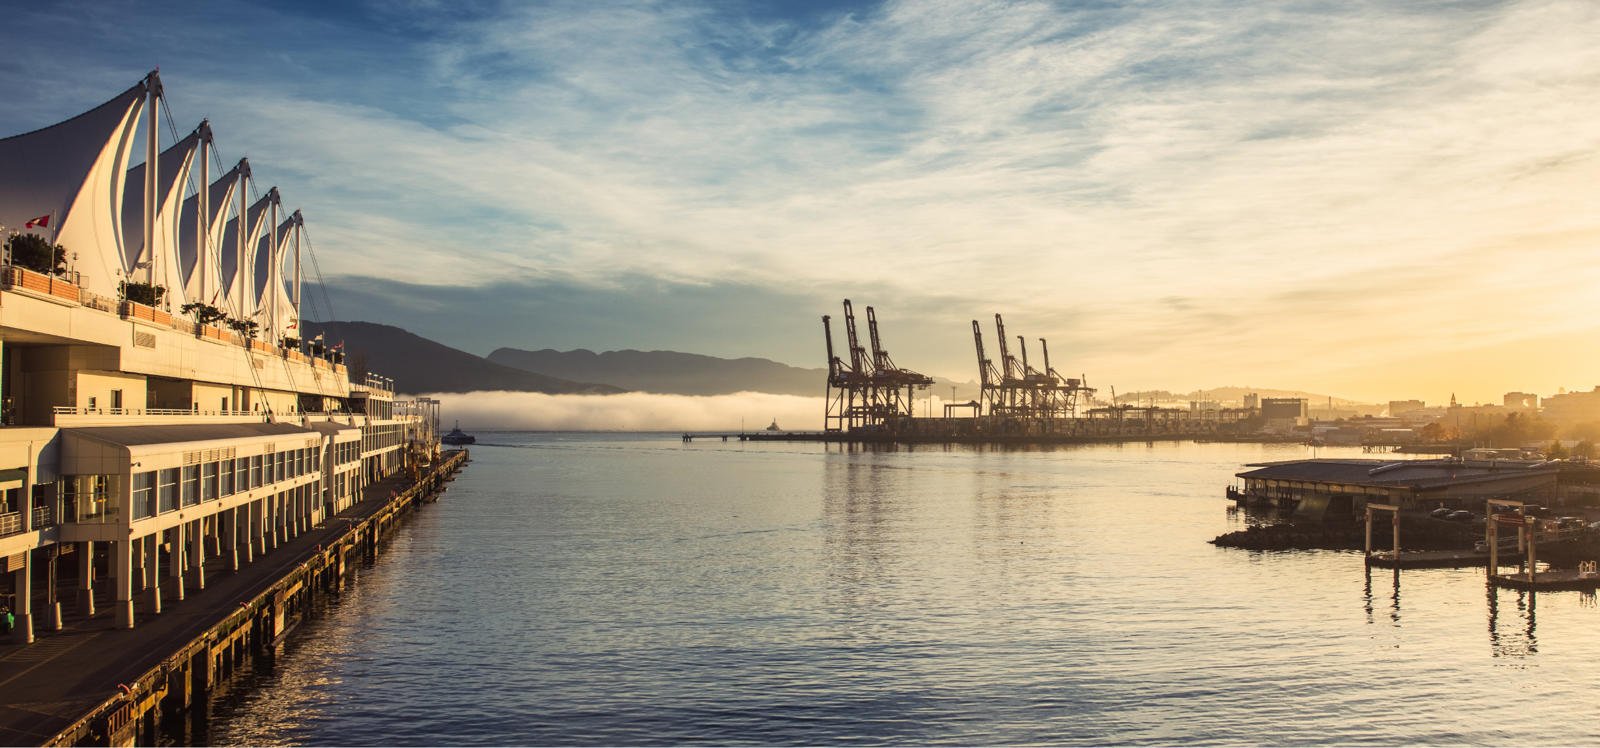 Vancouver Port at sunset